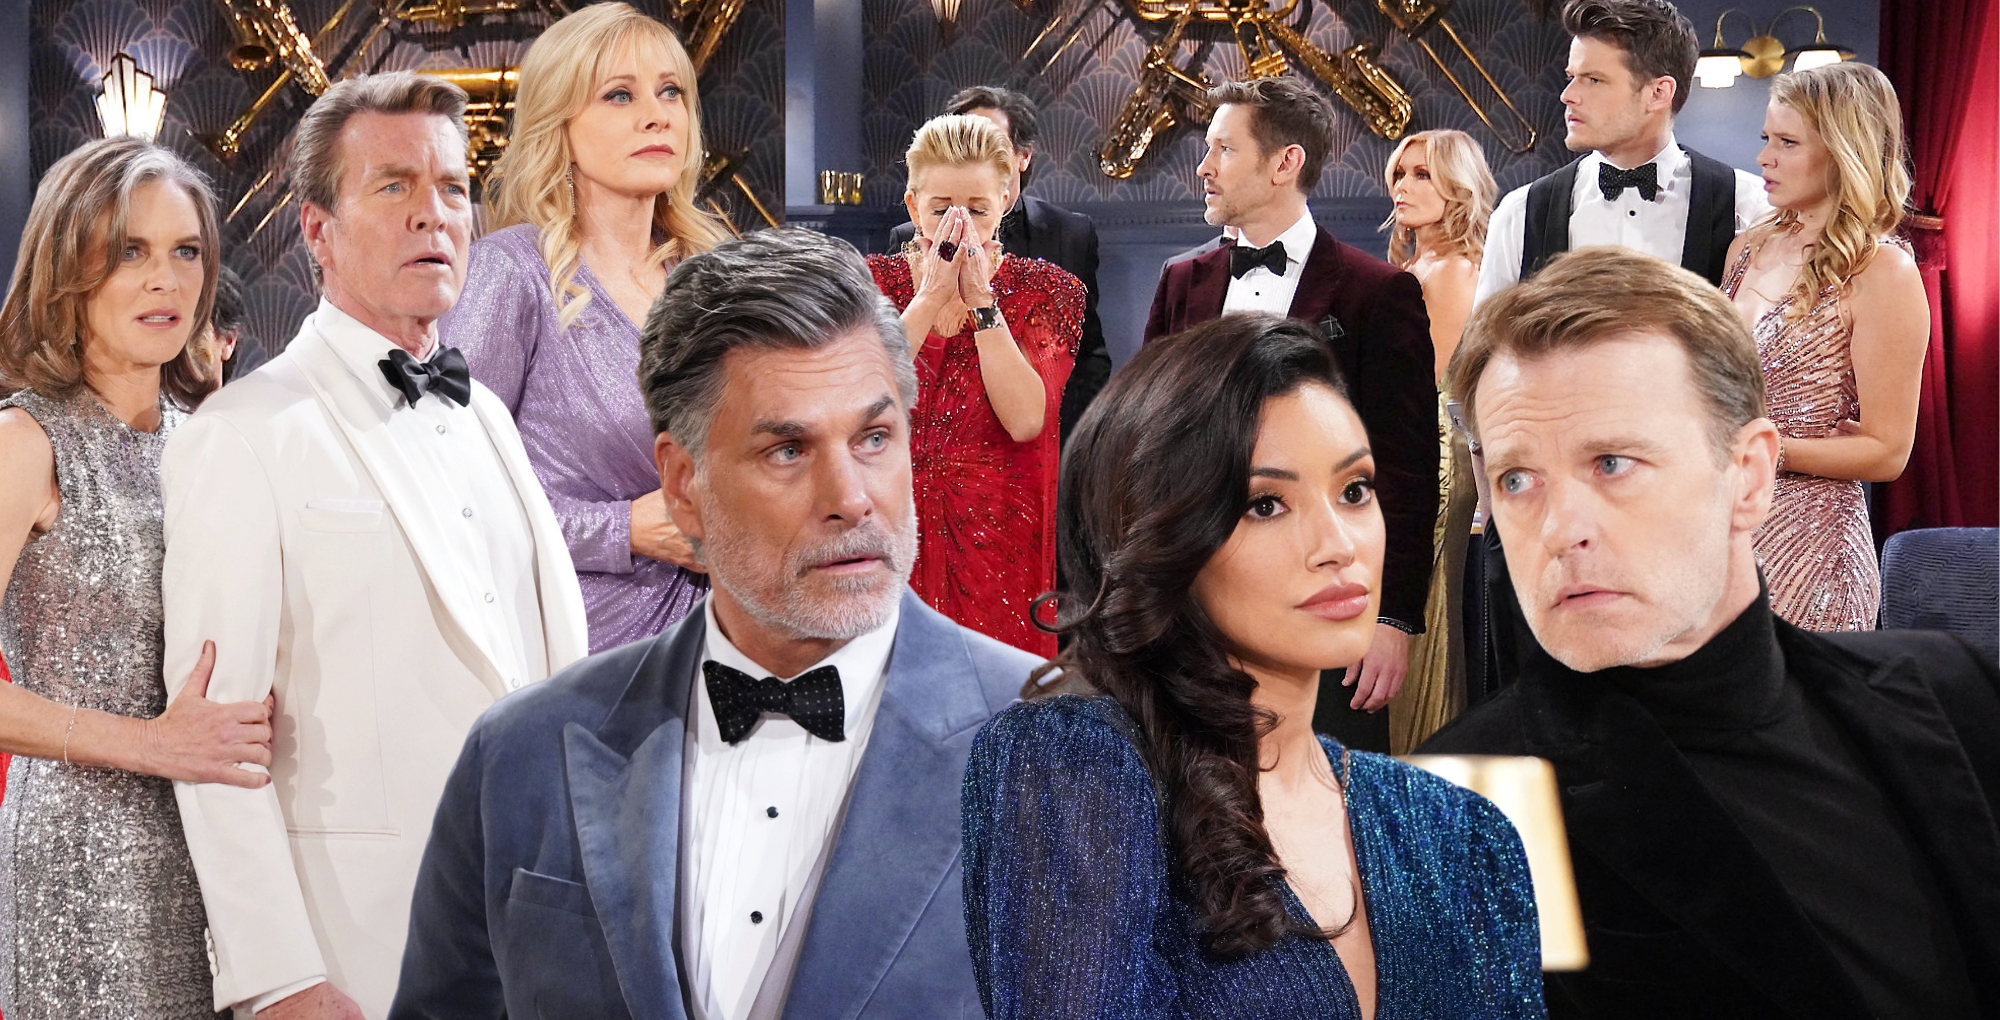 the young and the restless gala collage with everyone from genoa city